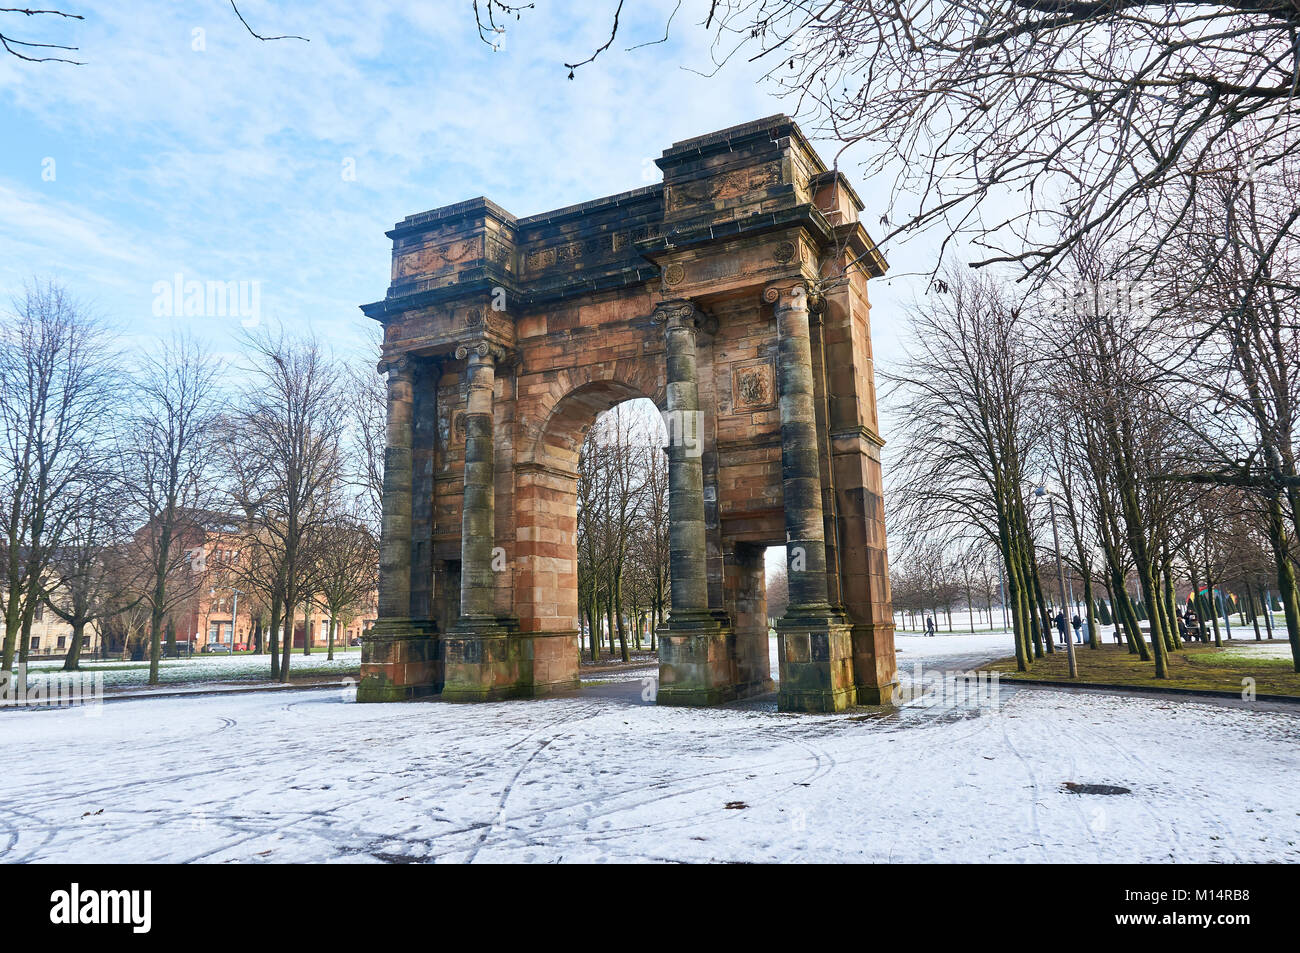 The McLennan Arch at the entrance to Glasgow Green Park, with the old high court building in the background. Stock Photo